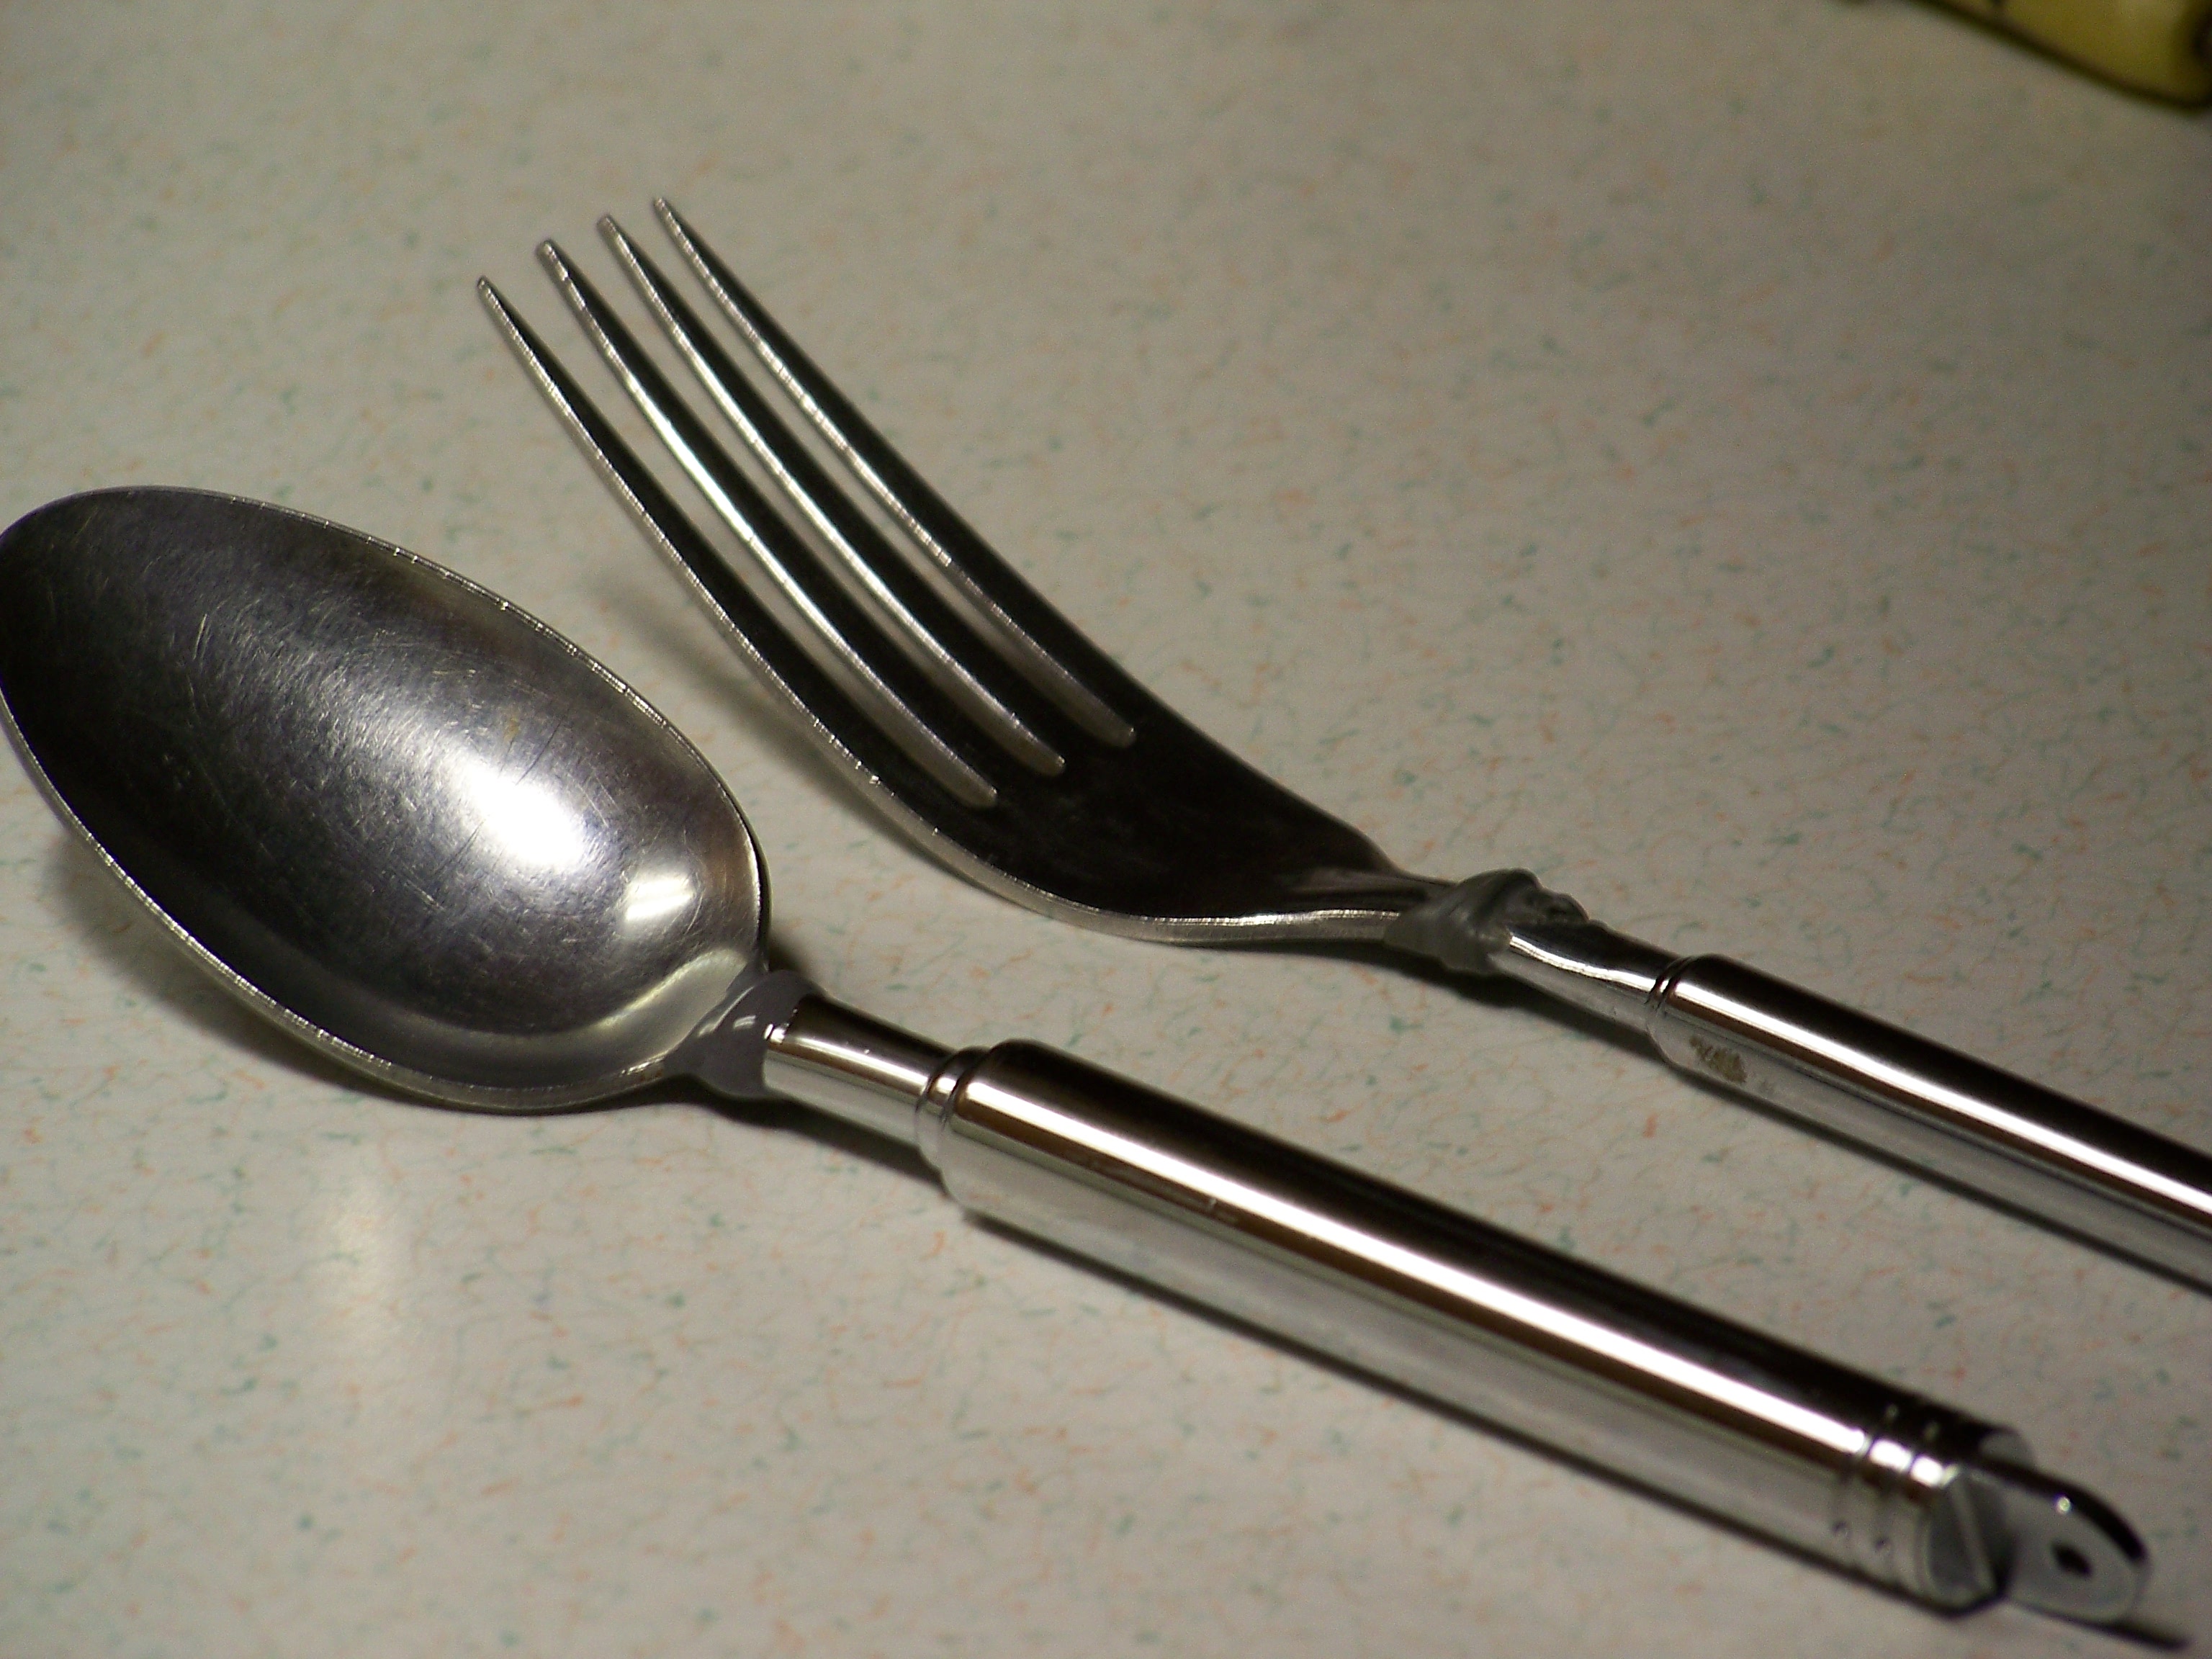 Pocket sized collapsible eating utensils. 